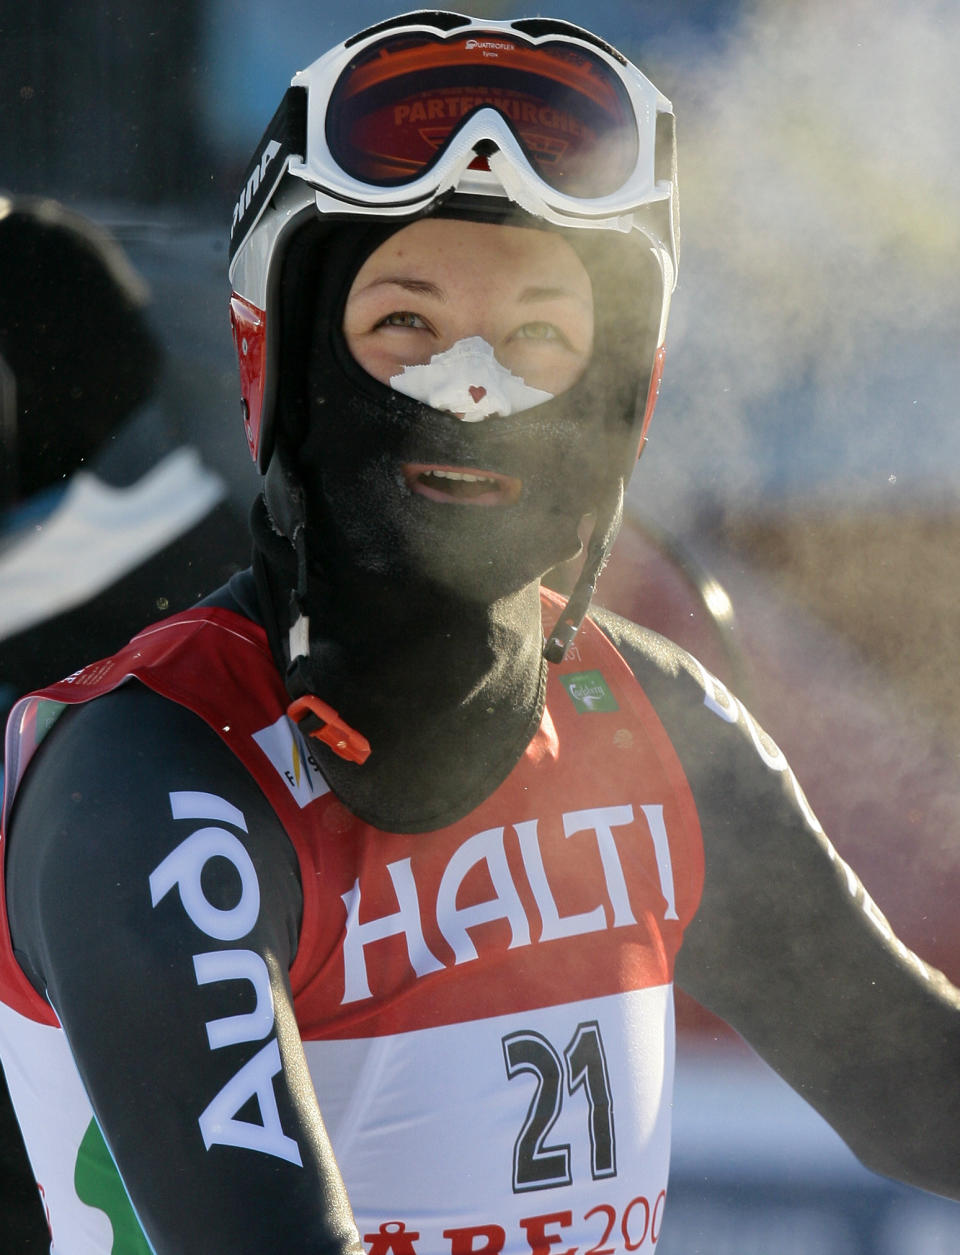 FILE - In this Feb. 9, 2007 file photo, Germany's Fanny Chmelar, wearing a face mask and tape to protect her face from the cold, looks at the scoreboard after completing the downhill portion of the Women's Combined, at the World Alpine Ski Championships in Are, Sweden. Even the world's top skiers can struggle to keep warm in extremely cold conditions, which will likely be a factor at the Alpine world championships opening in Are, Sweden, next week, from 5–17 February 2019. (AP Photo/Luca Bruno, file)